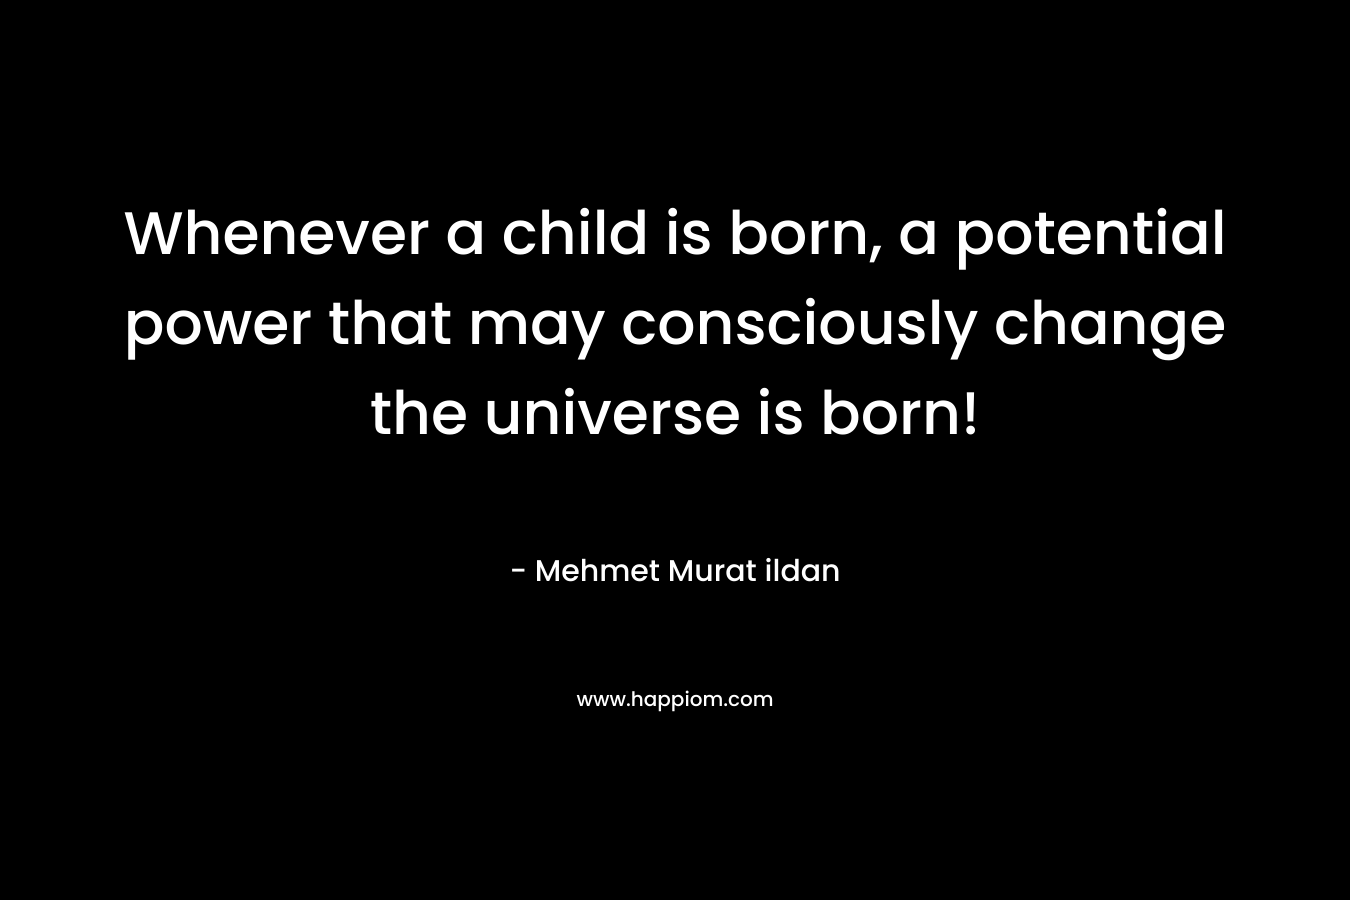 Whenever a child is born, a potential power that may consciously change the universe is born!